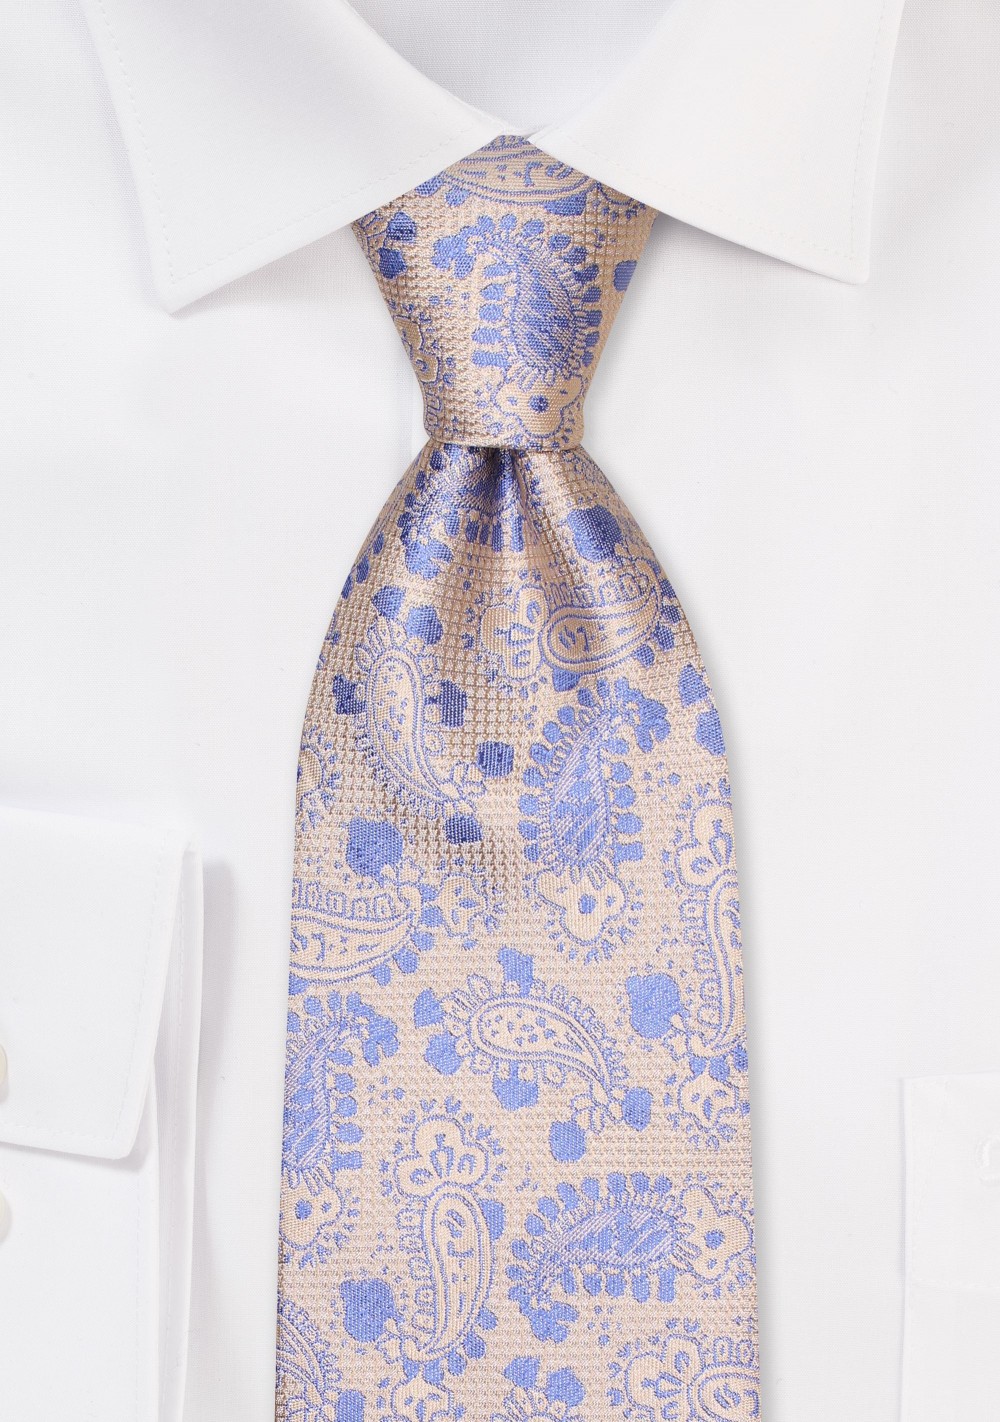 Textured Paisley Tie in Light Blue and Gold